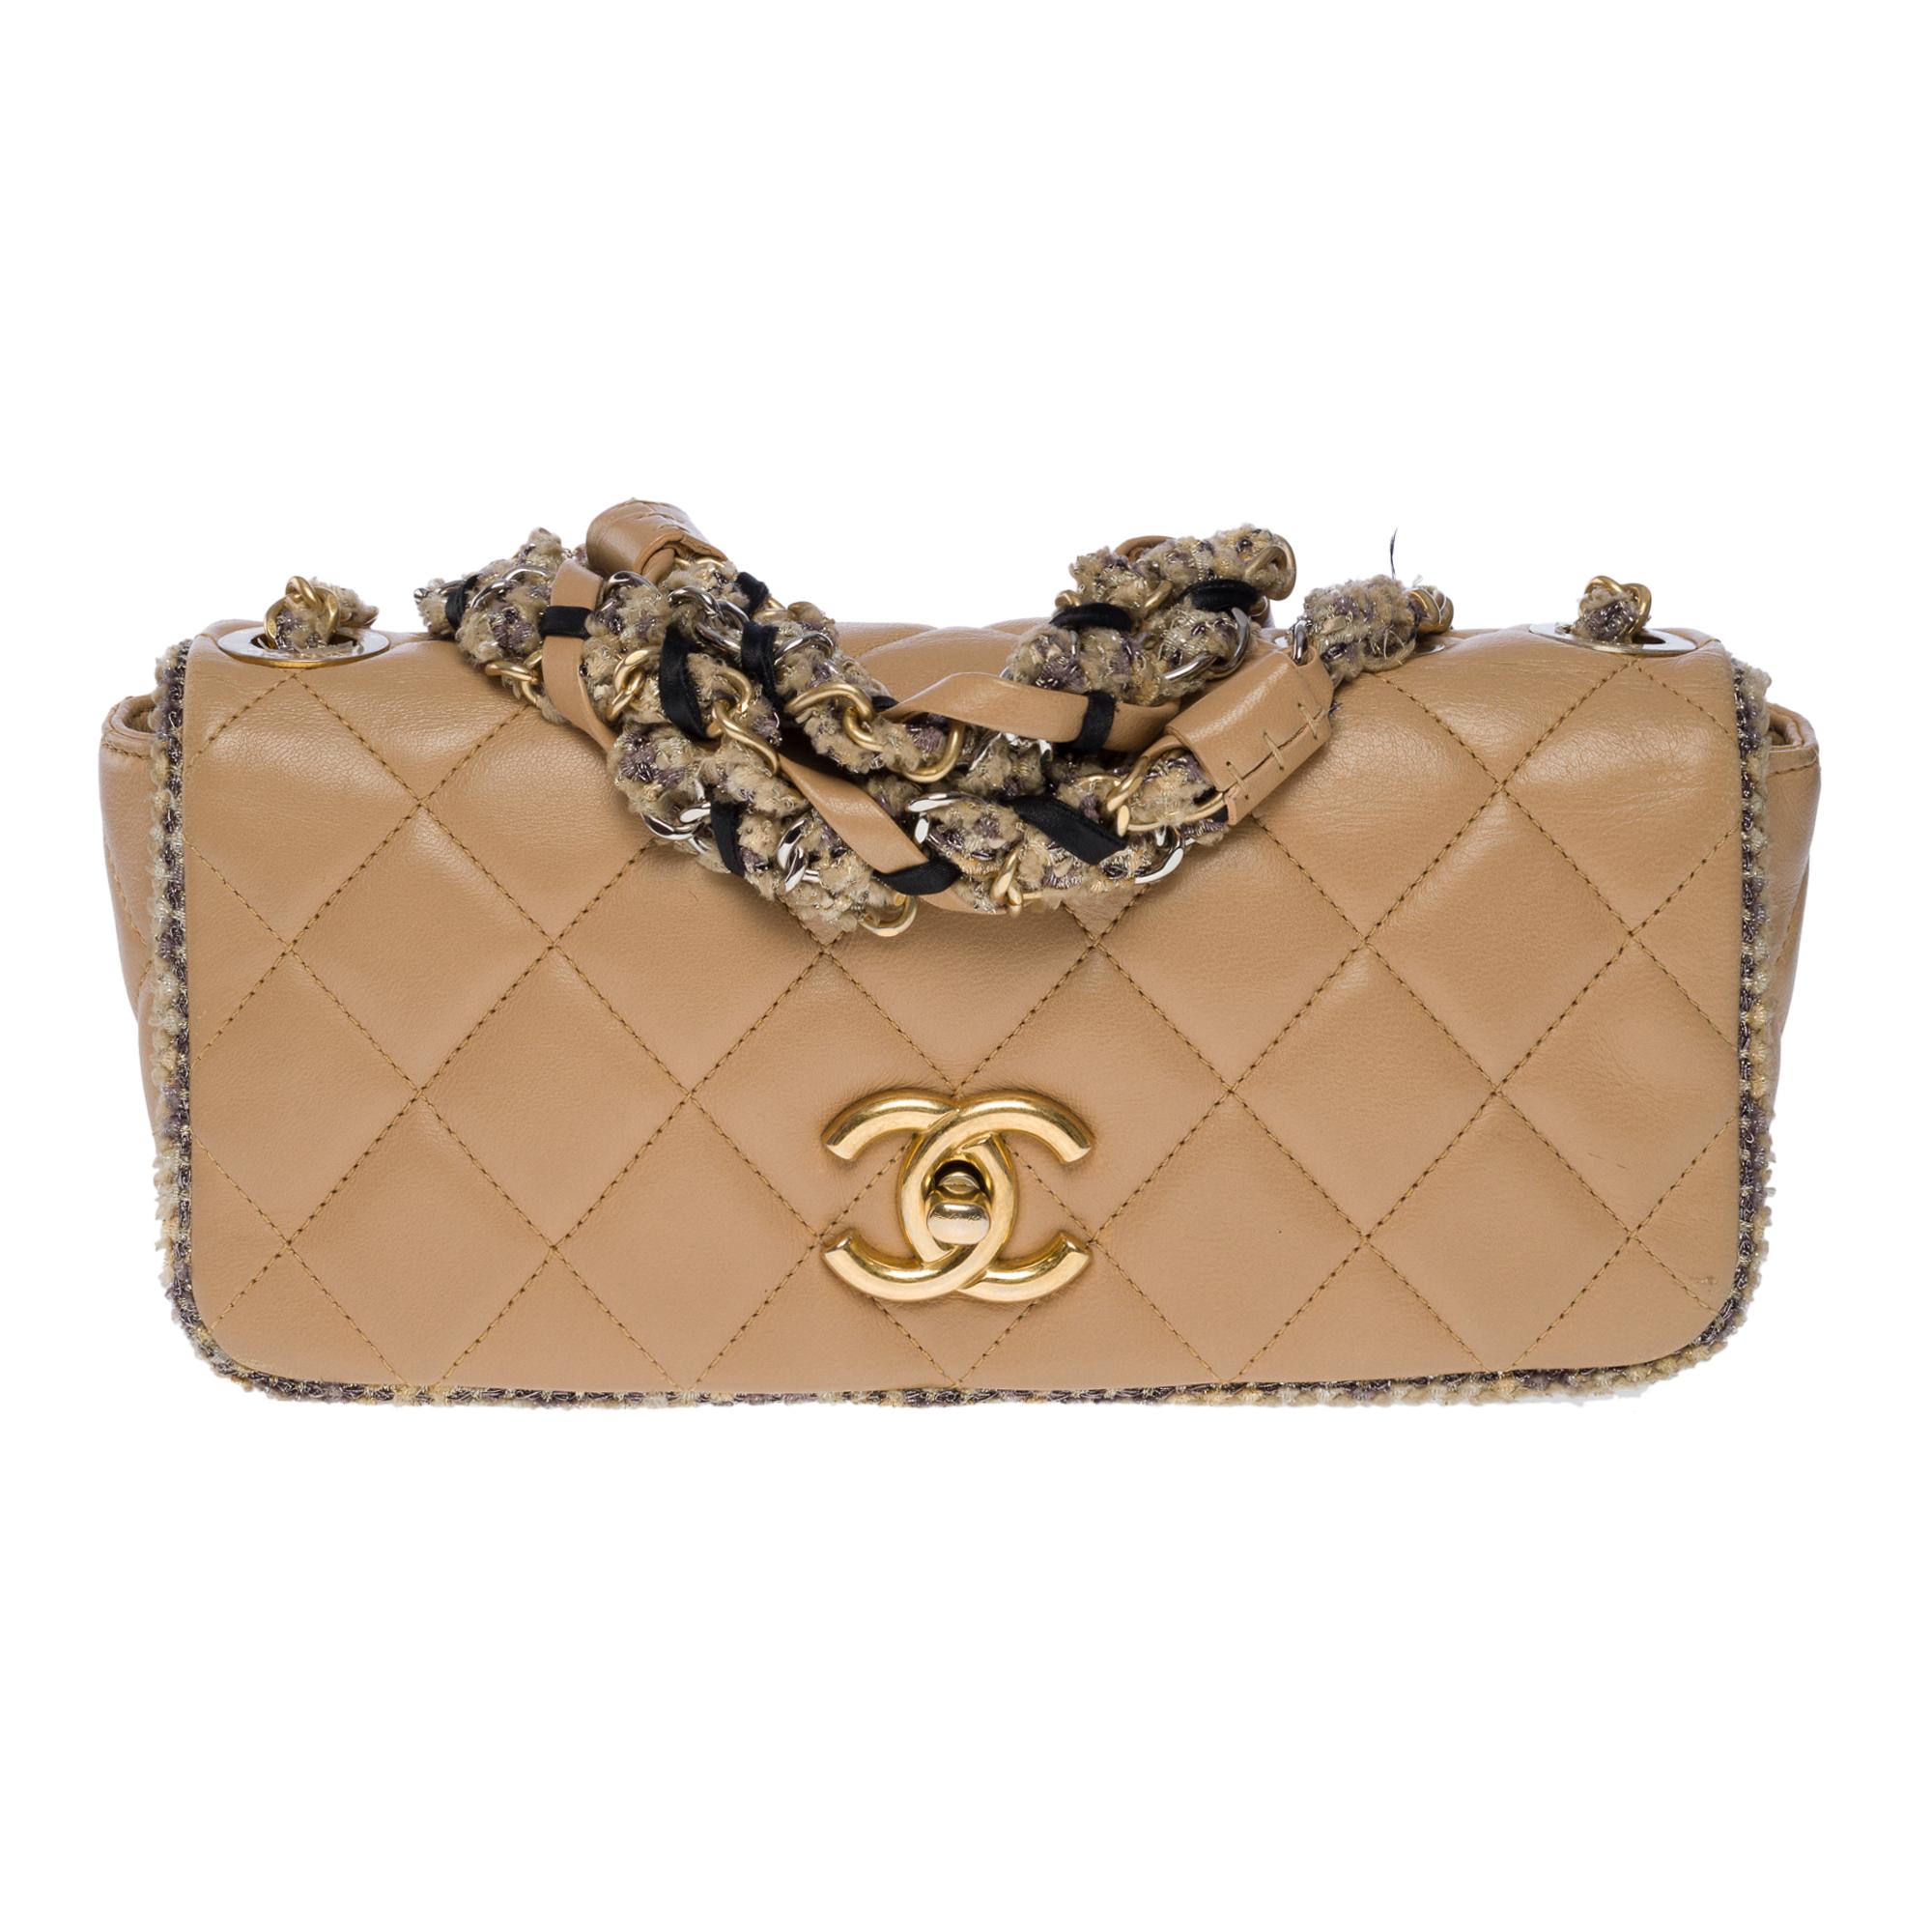 Rare Chanel Classic Full flap limited edition shoulder bag in beige quilted leather , gold metal hardware, a simple fantasy handle in gold metal interwoven with leather and beige and silver fabric, a chain-handle in gold metal interwoven with